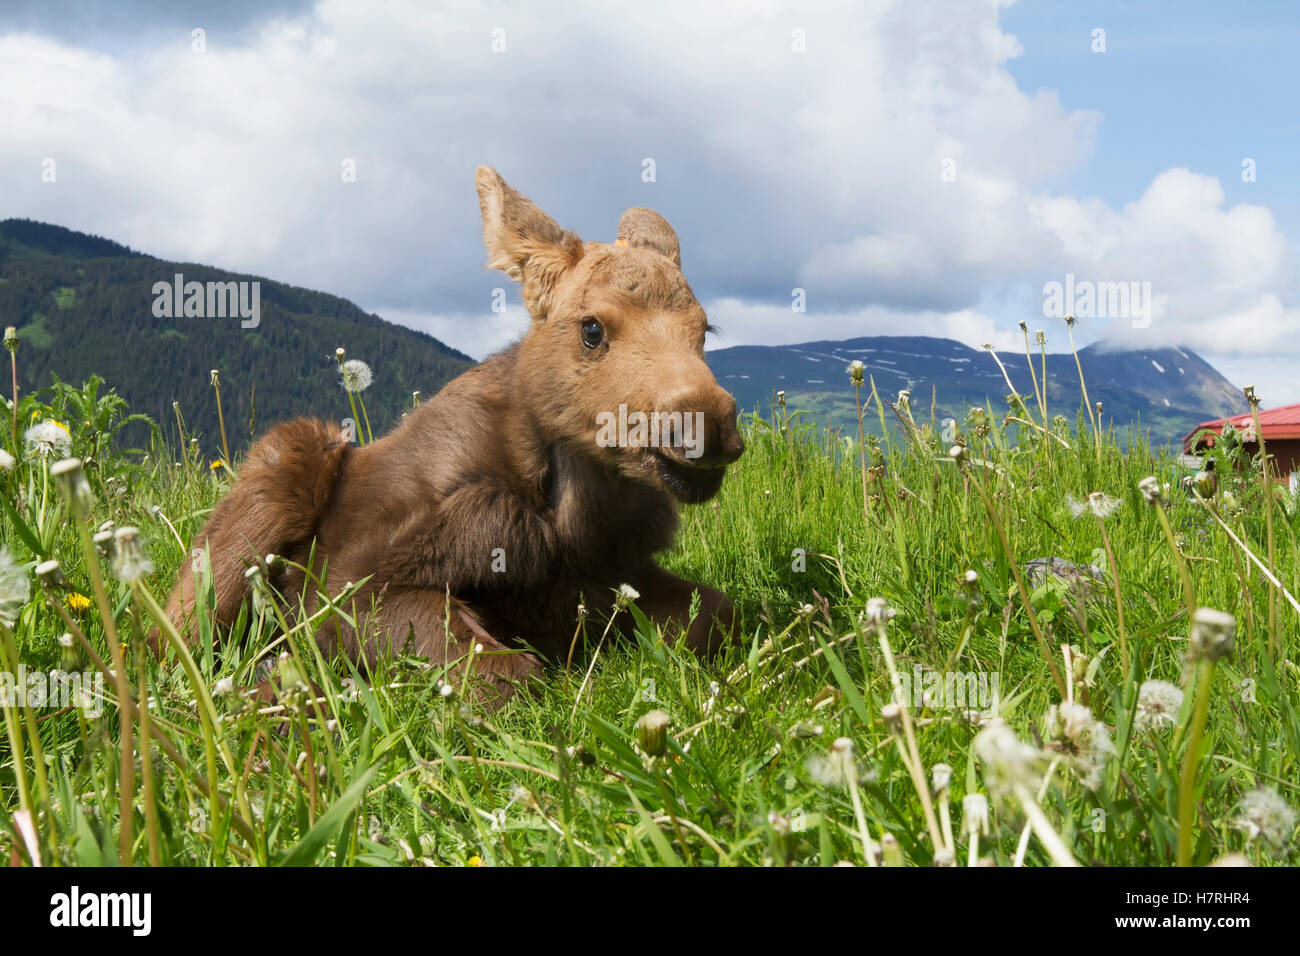 Young moose (alces alces) in grass at the Alaska Wildlife Conservation Center in summertime; Portage, Alaska, USA Stock Photo